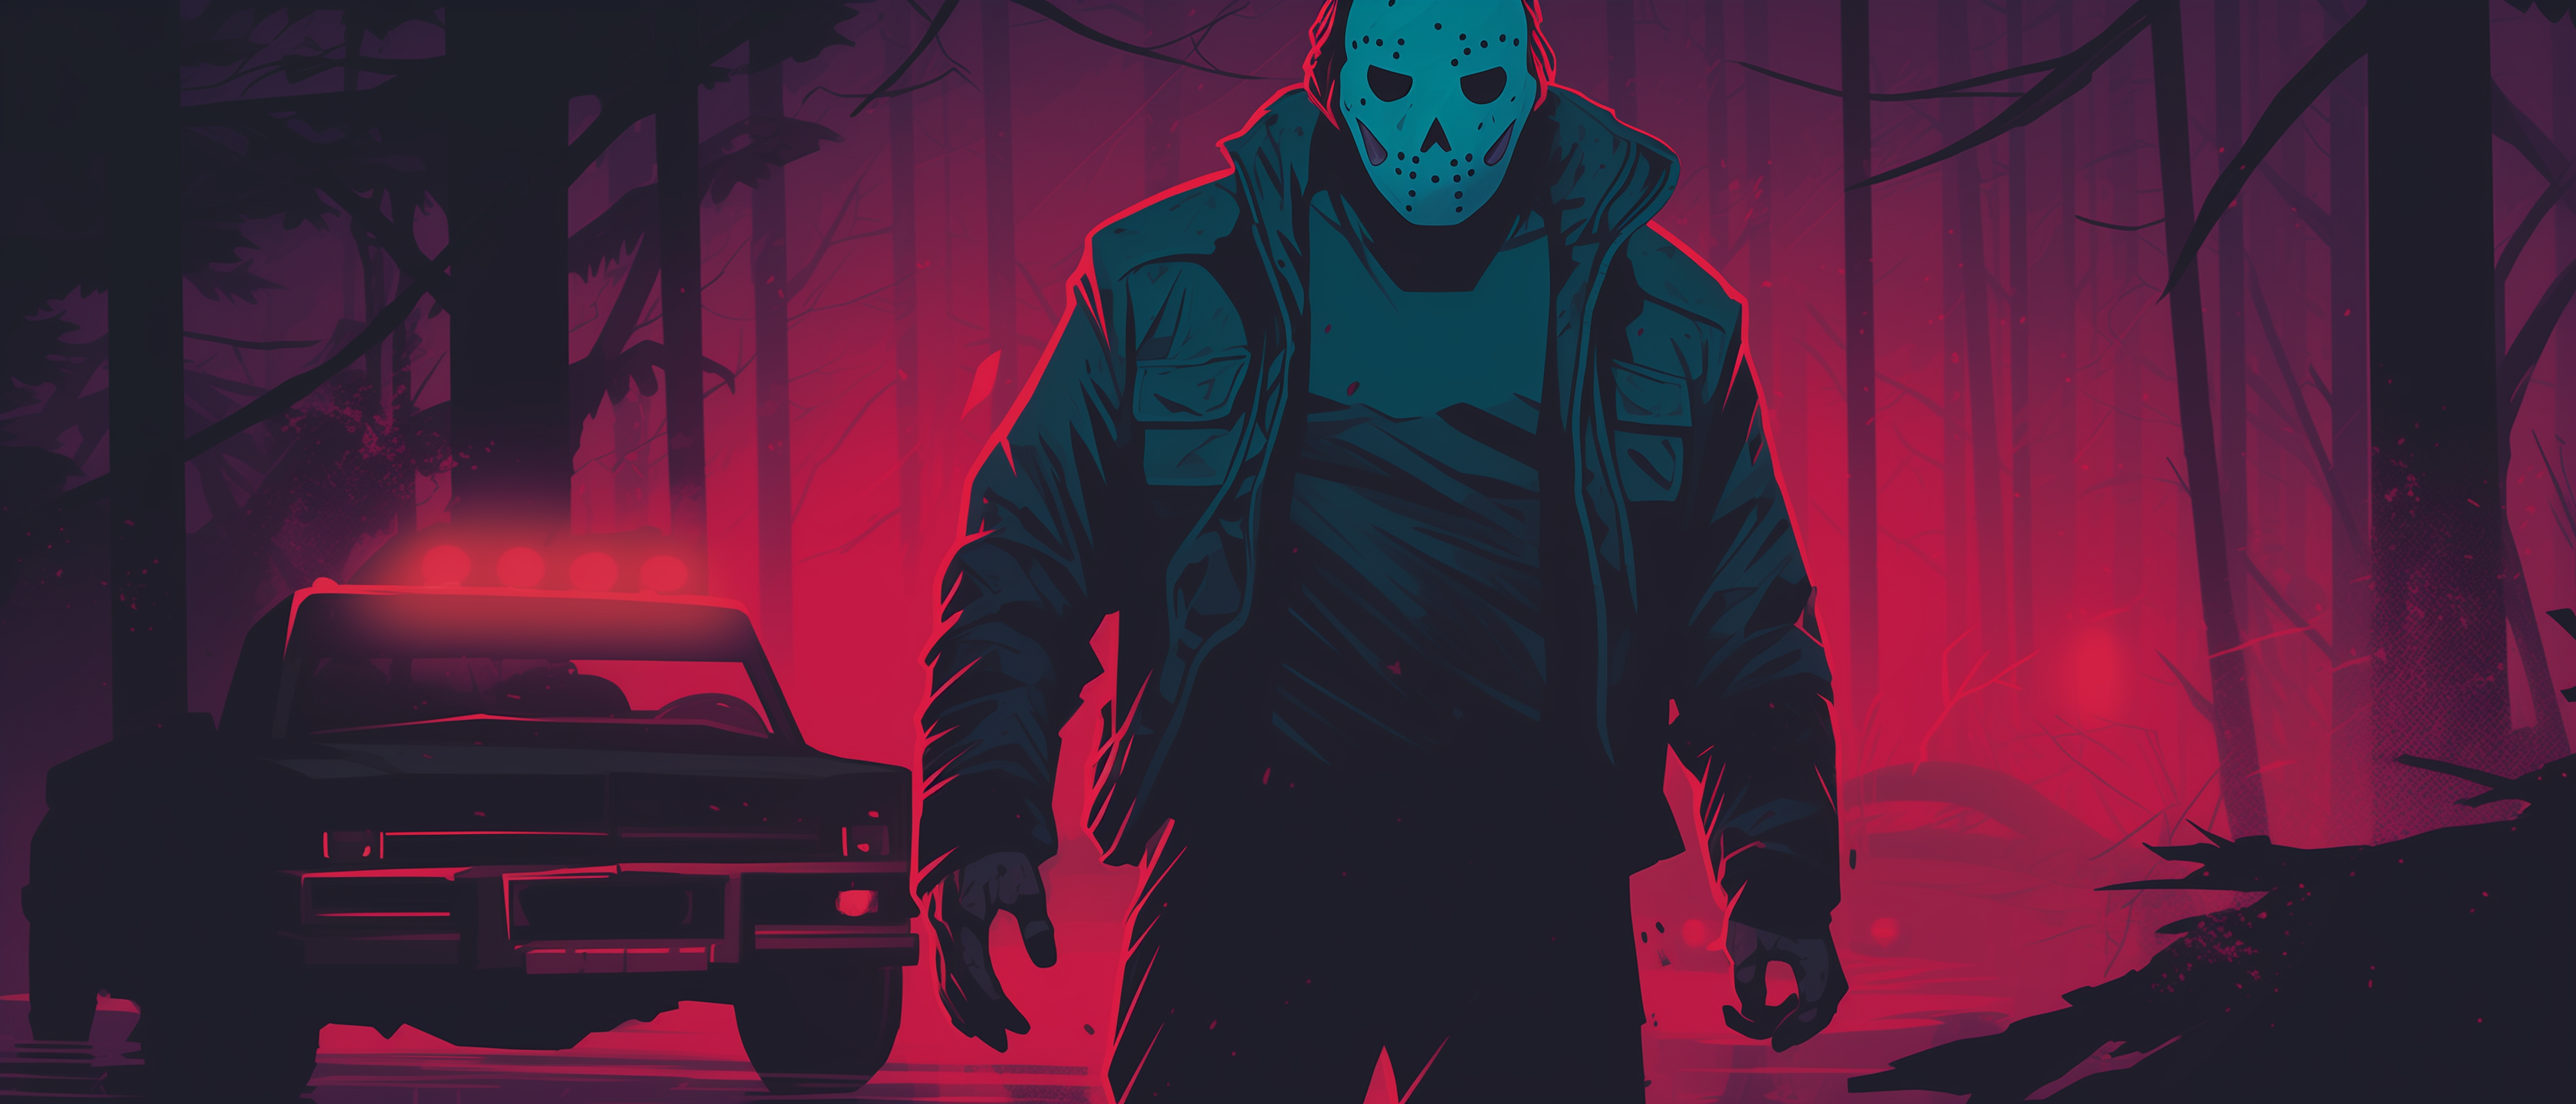 People 3360x1440 AI art horror Friday the 13th Jason Voorhees mask